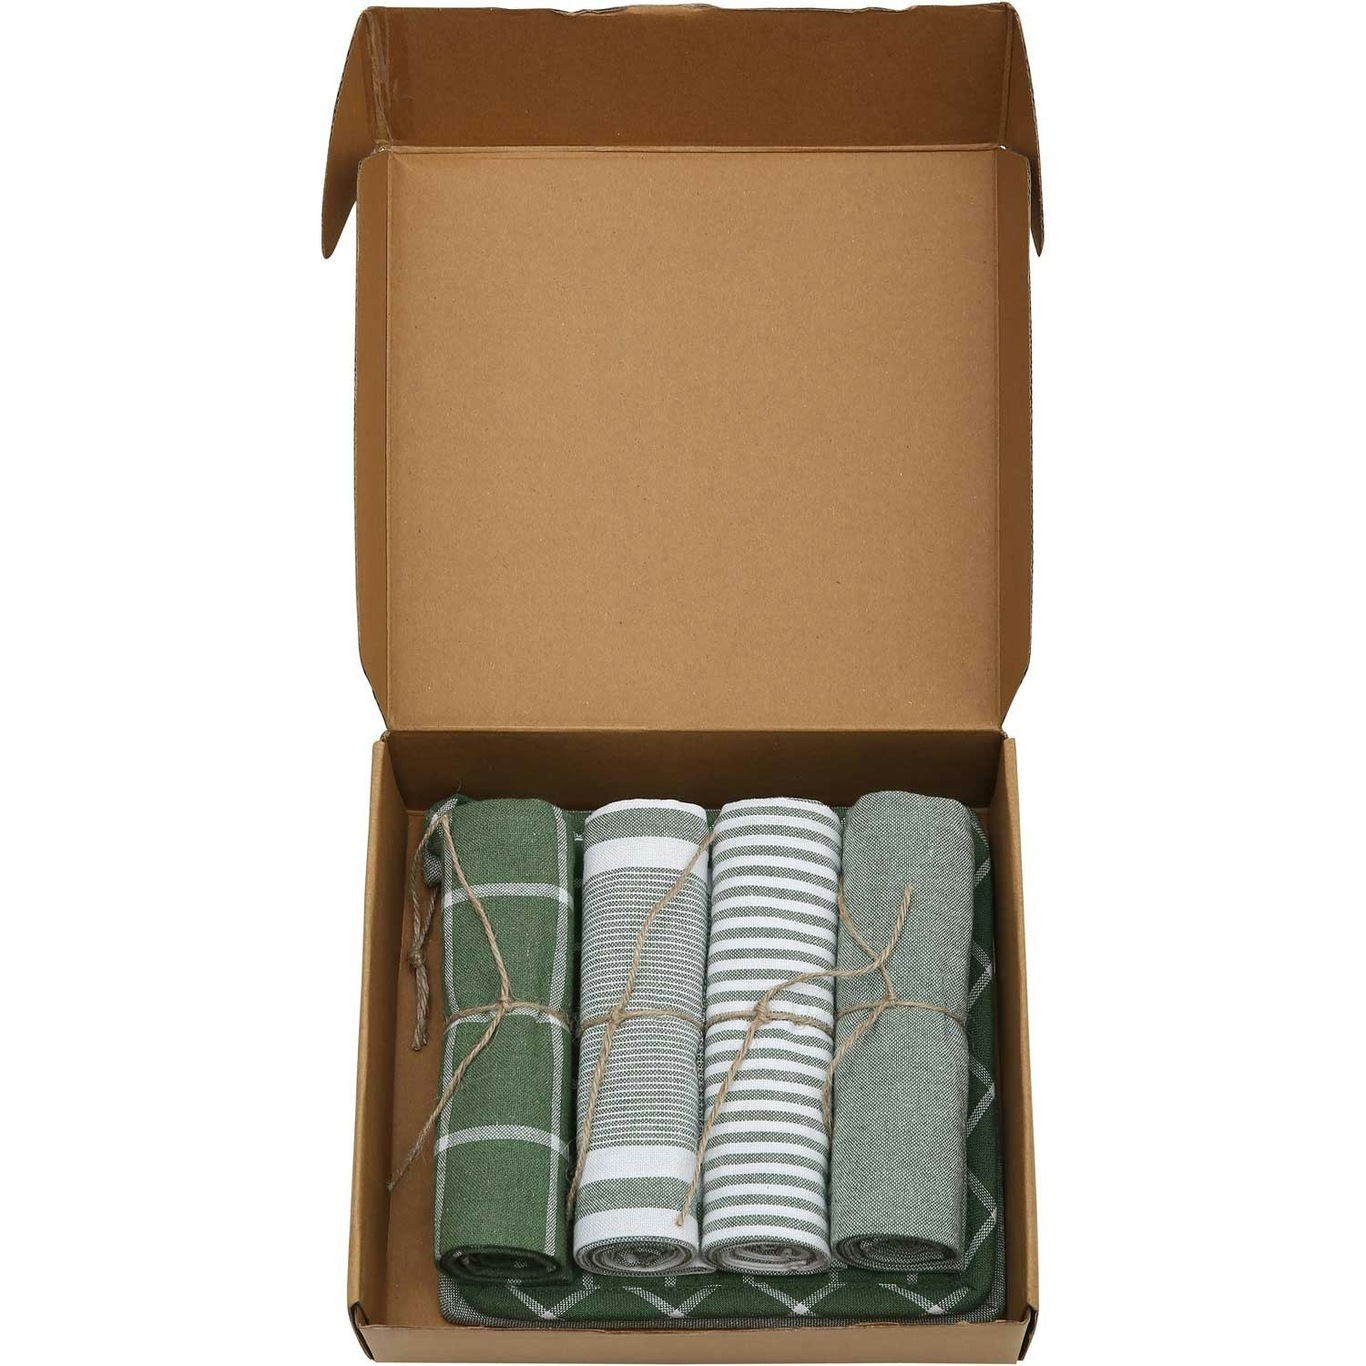 https://royaldesign.com/image/2/recycled-by-wille-gift-set-kitchen-4-tea-towels-2-pot-holders-4?w=800&quality=80